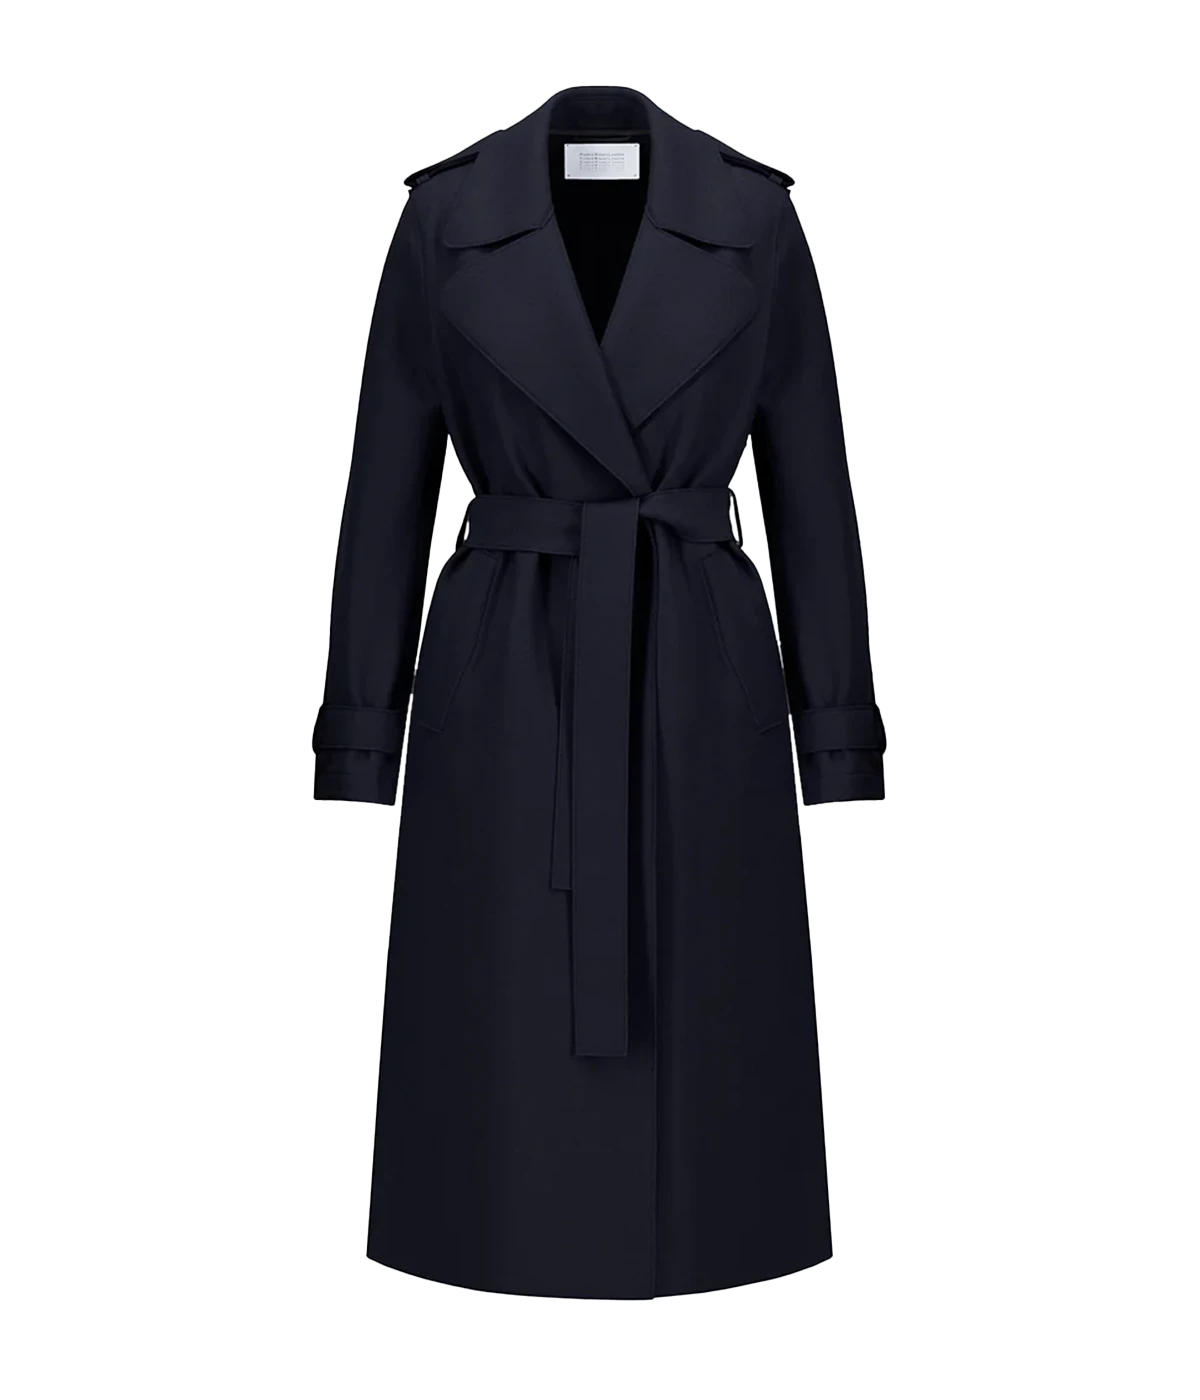 Double Vent Trench Coat in Navy Blue